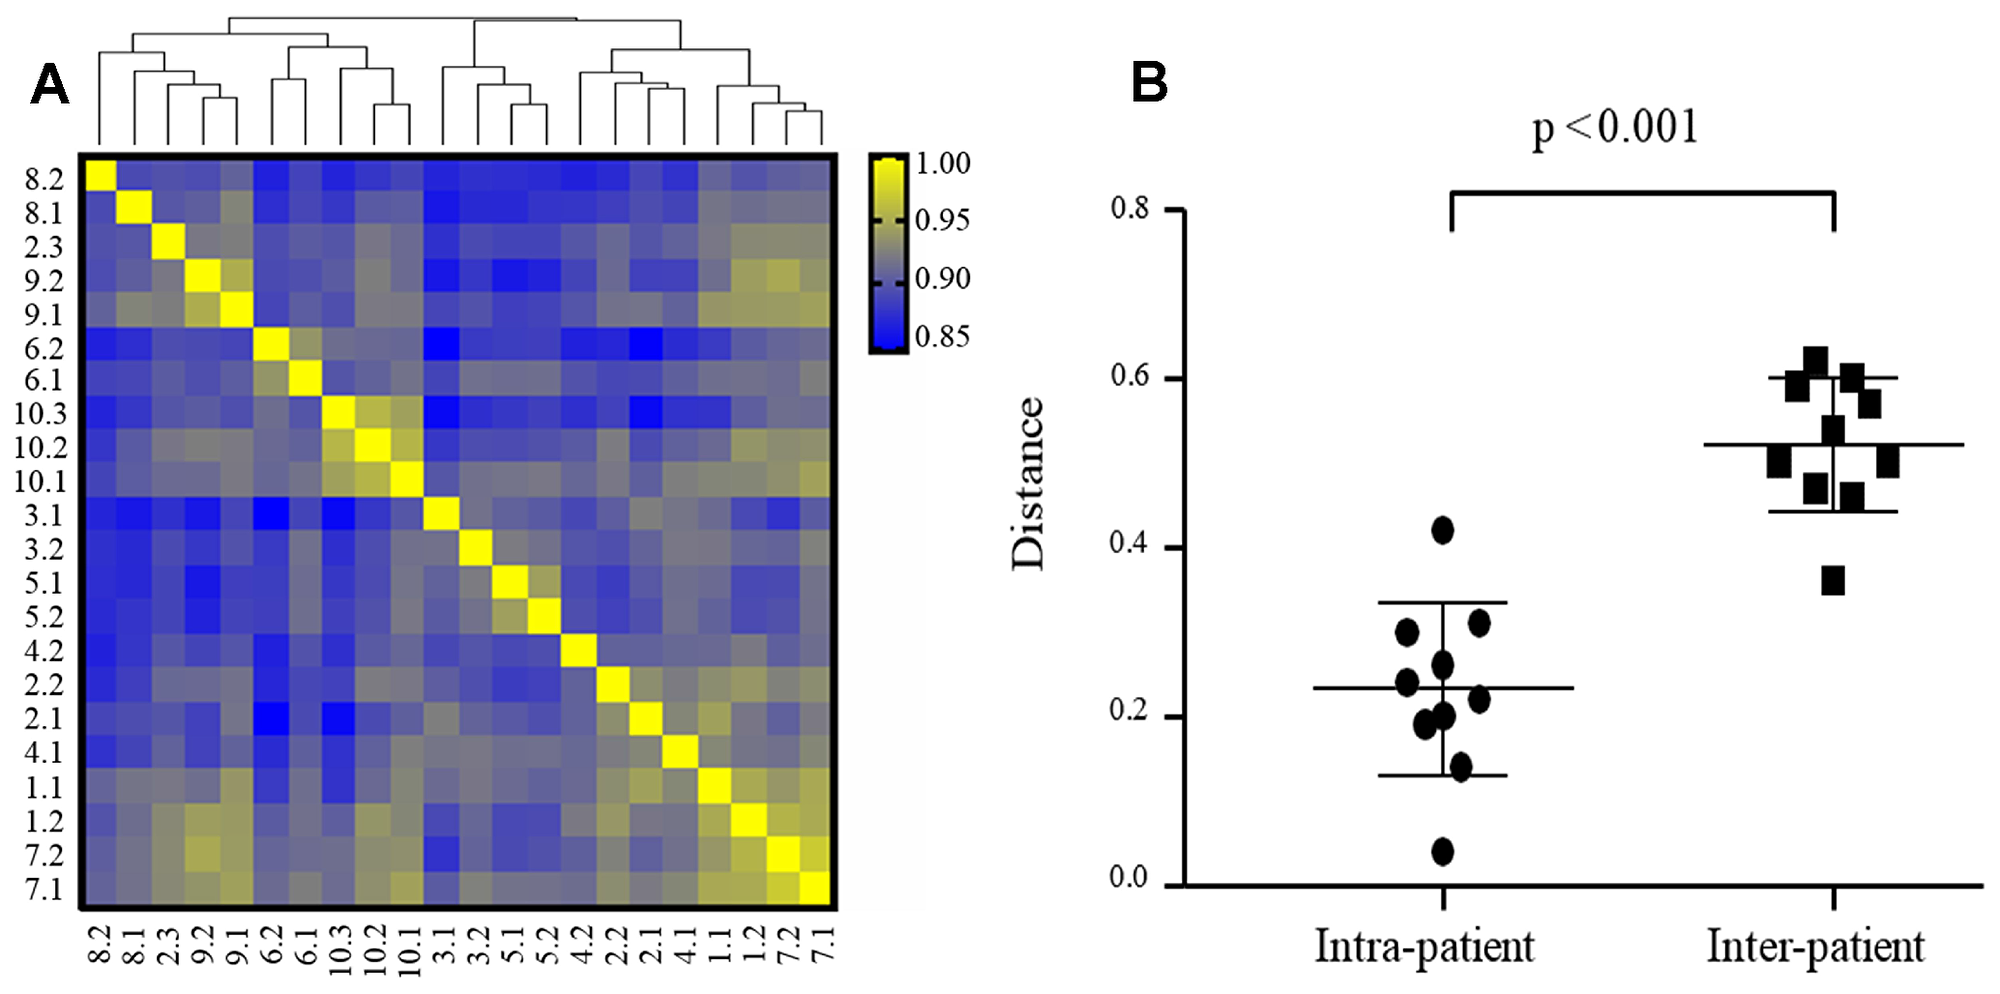 Intra- and inter-patient heterogeneity of mRNA expression in TNBC (N = 22 specimens).